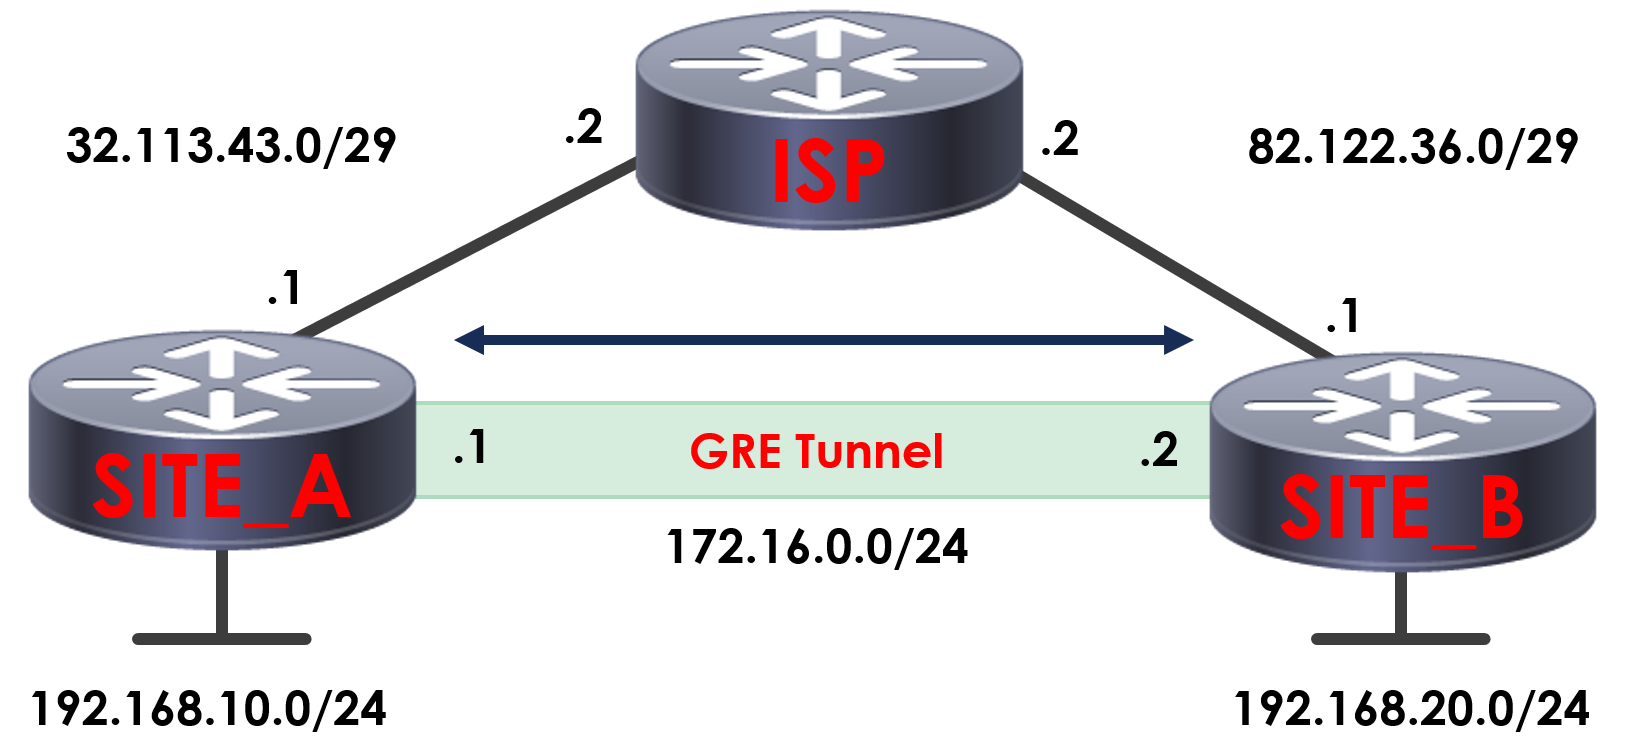 GRE Tunneling Connectivity